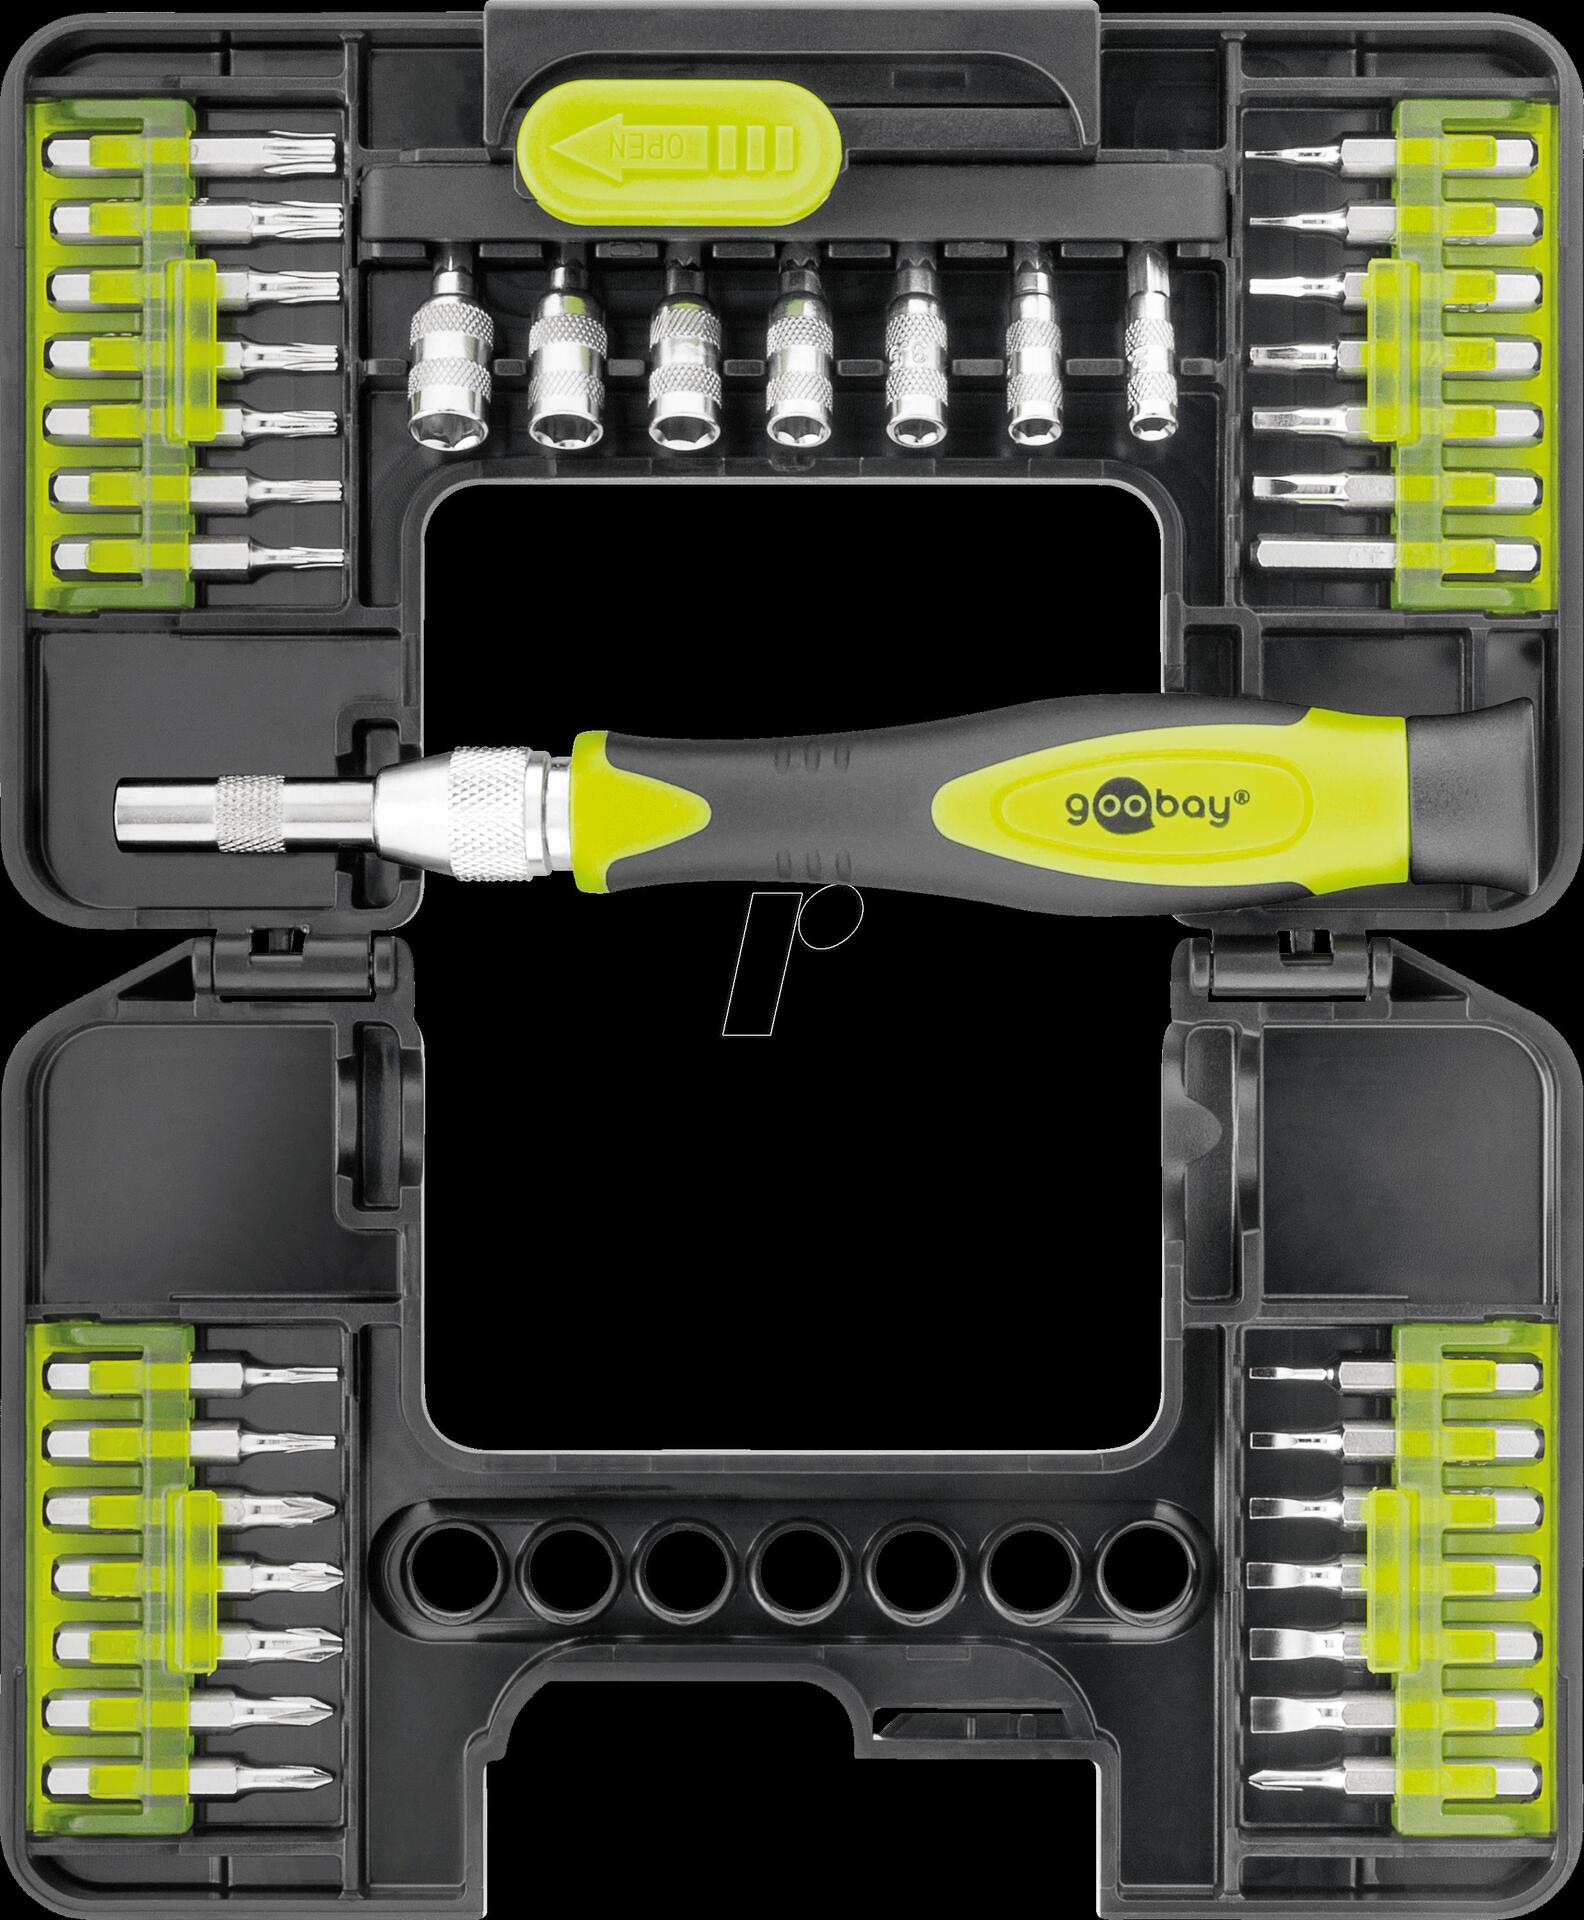 Wentronic goobay Precision screwdriver with bit and socket set (74003)